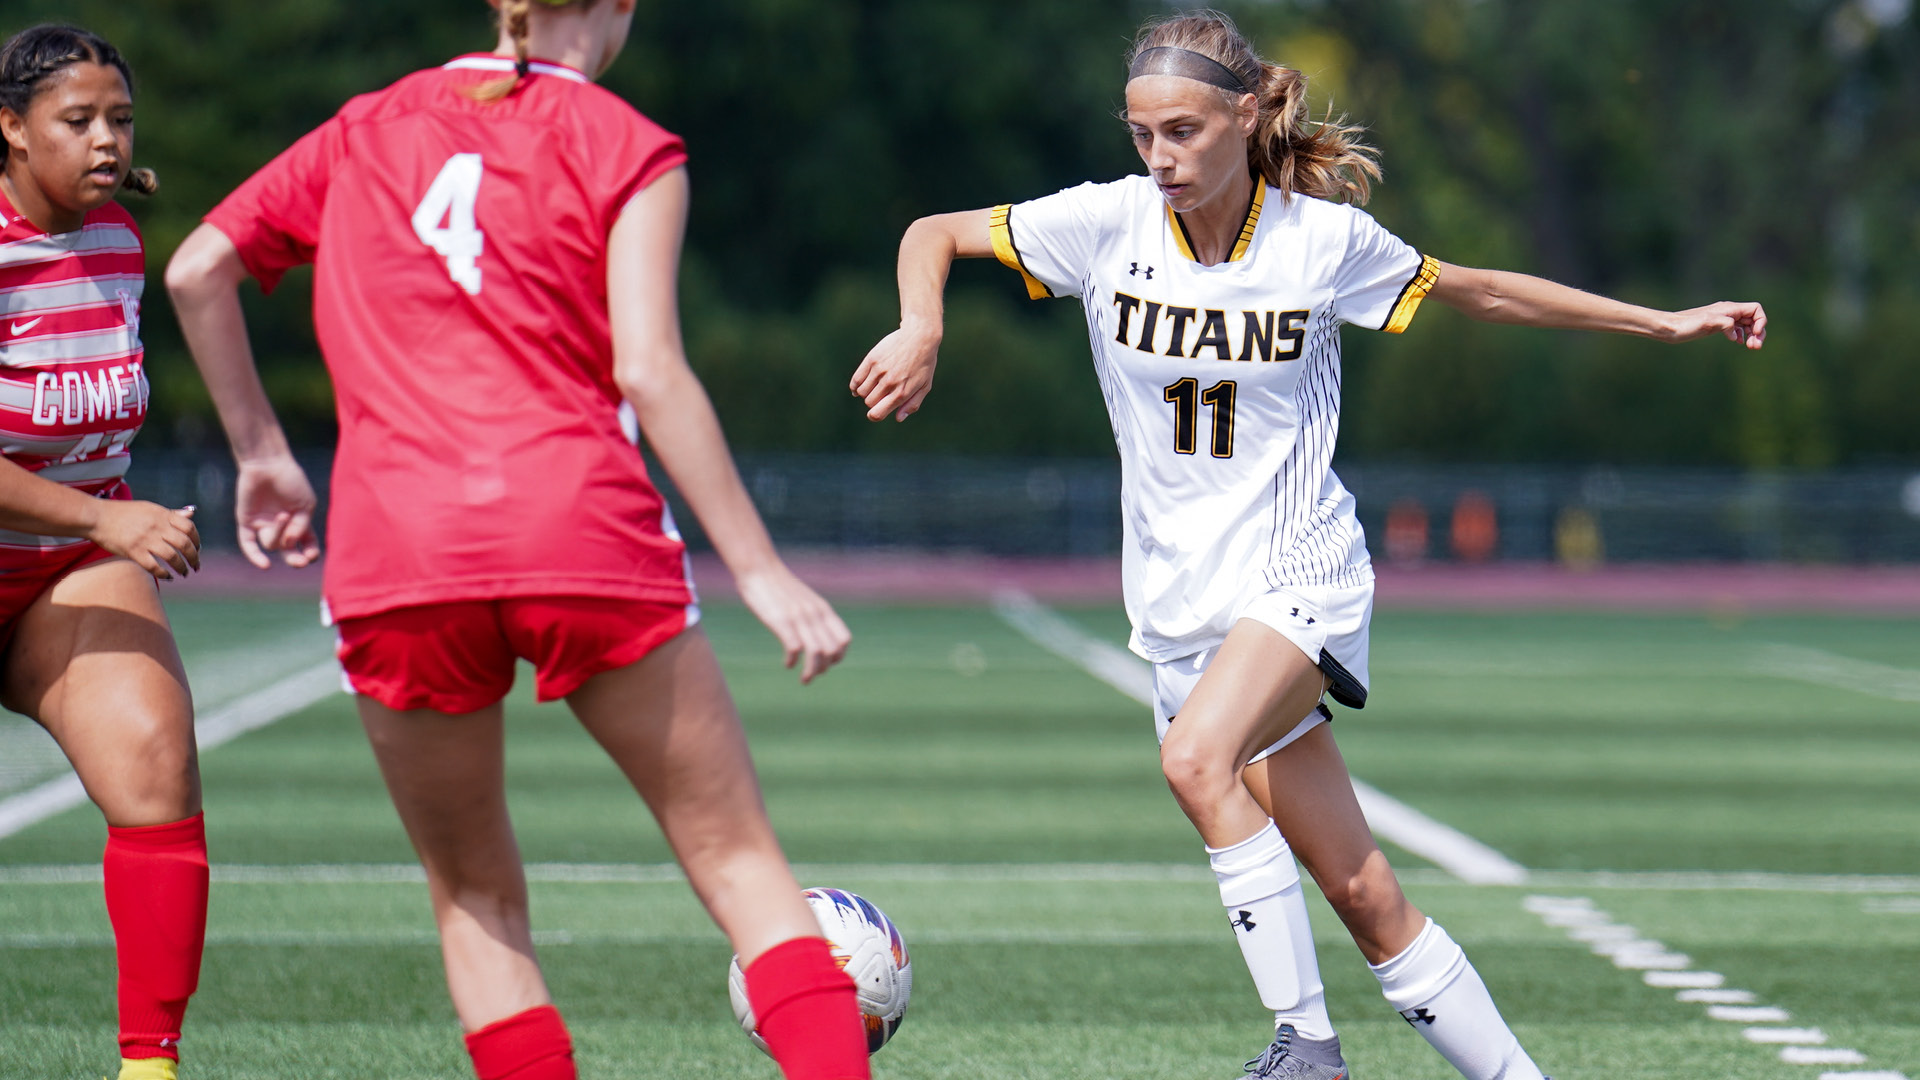 Courtesy of UWO Athletics -- UWOs Molly Jackson dribbles the ball in a game earlier this season. Jackson scored the Titans lone goal in the 73rd minute against Carthage.